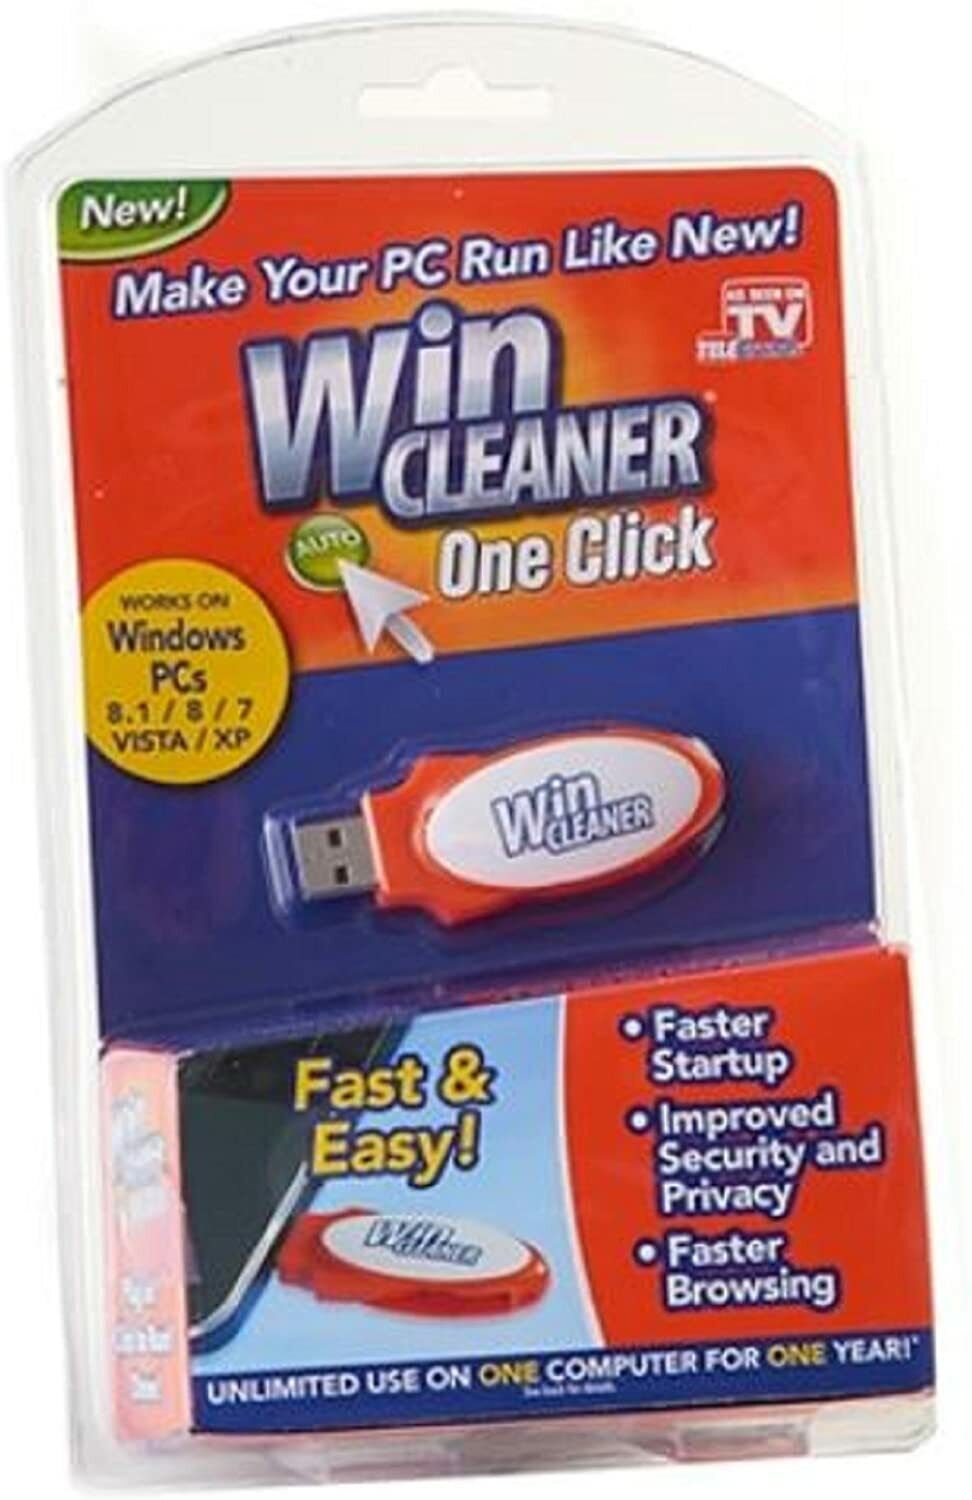 Telebrands Win Cleaner Computer Repair Software PC Cleaner in a Single USB Drive